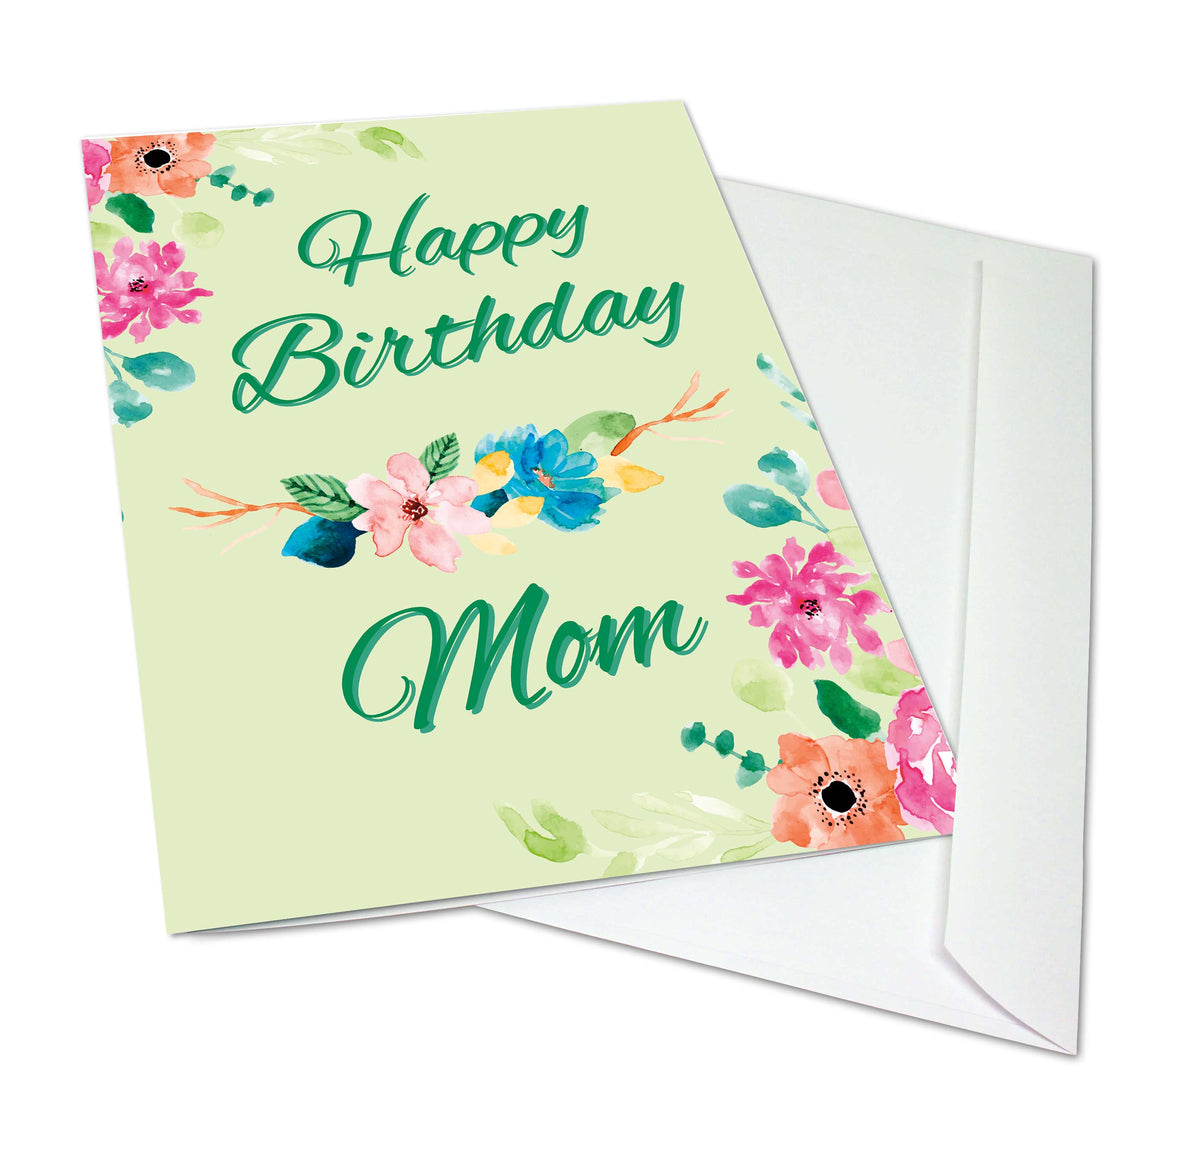 Extra-Large Pink Happy Birthday Card - Blank Inside with Envelope -  11.25"x9"